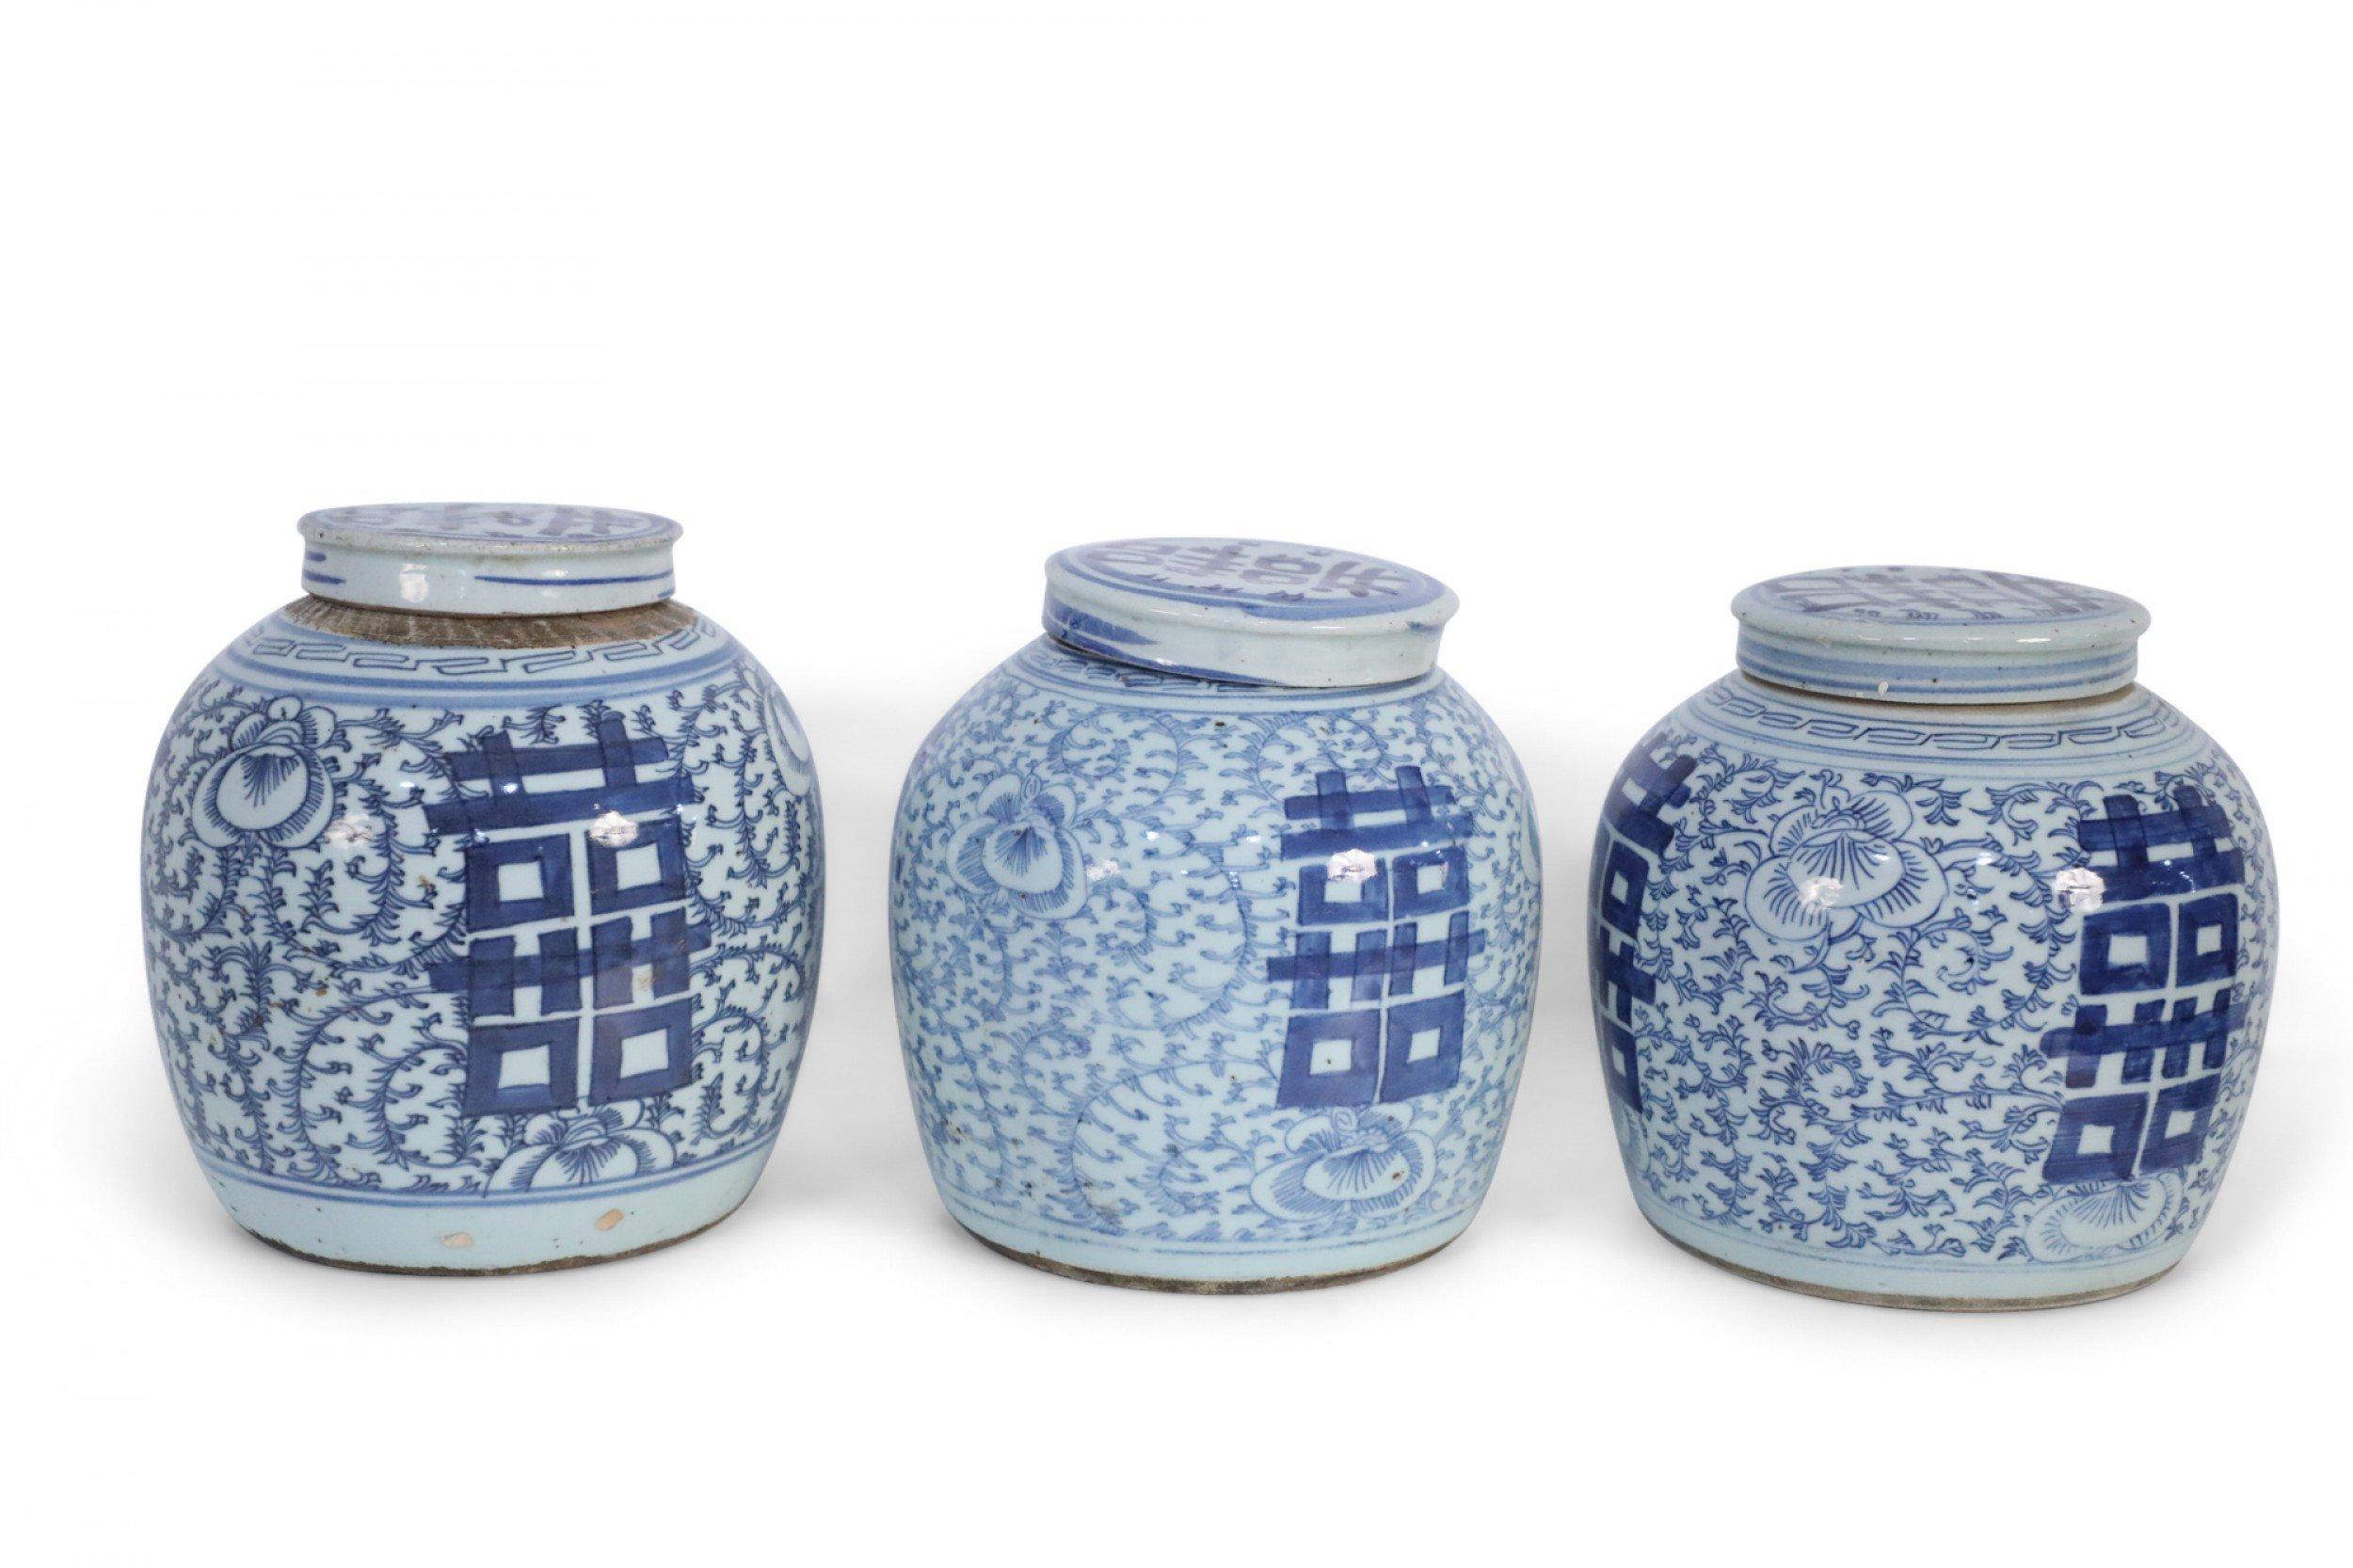 3 antique Chinese (Late 19th century) similar ceramic ginger jars with blue floral designs surrounding bold, centered characters and geometric patterned bands leading to brown rustic stripes at the mouth openings. Each is topped with a lid depicting